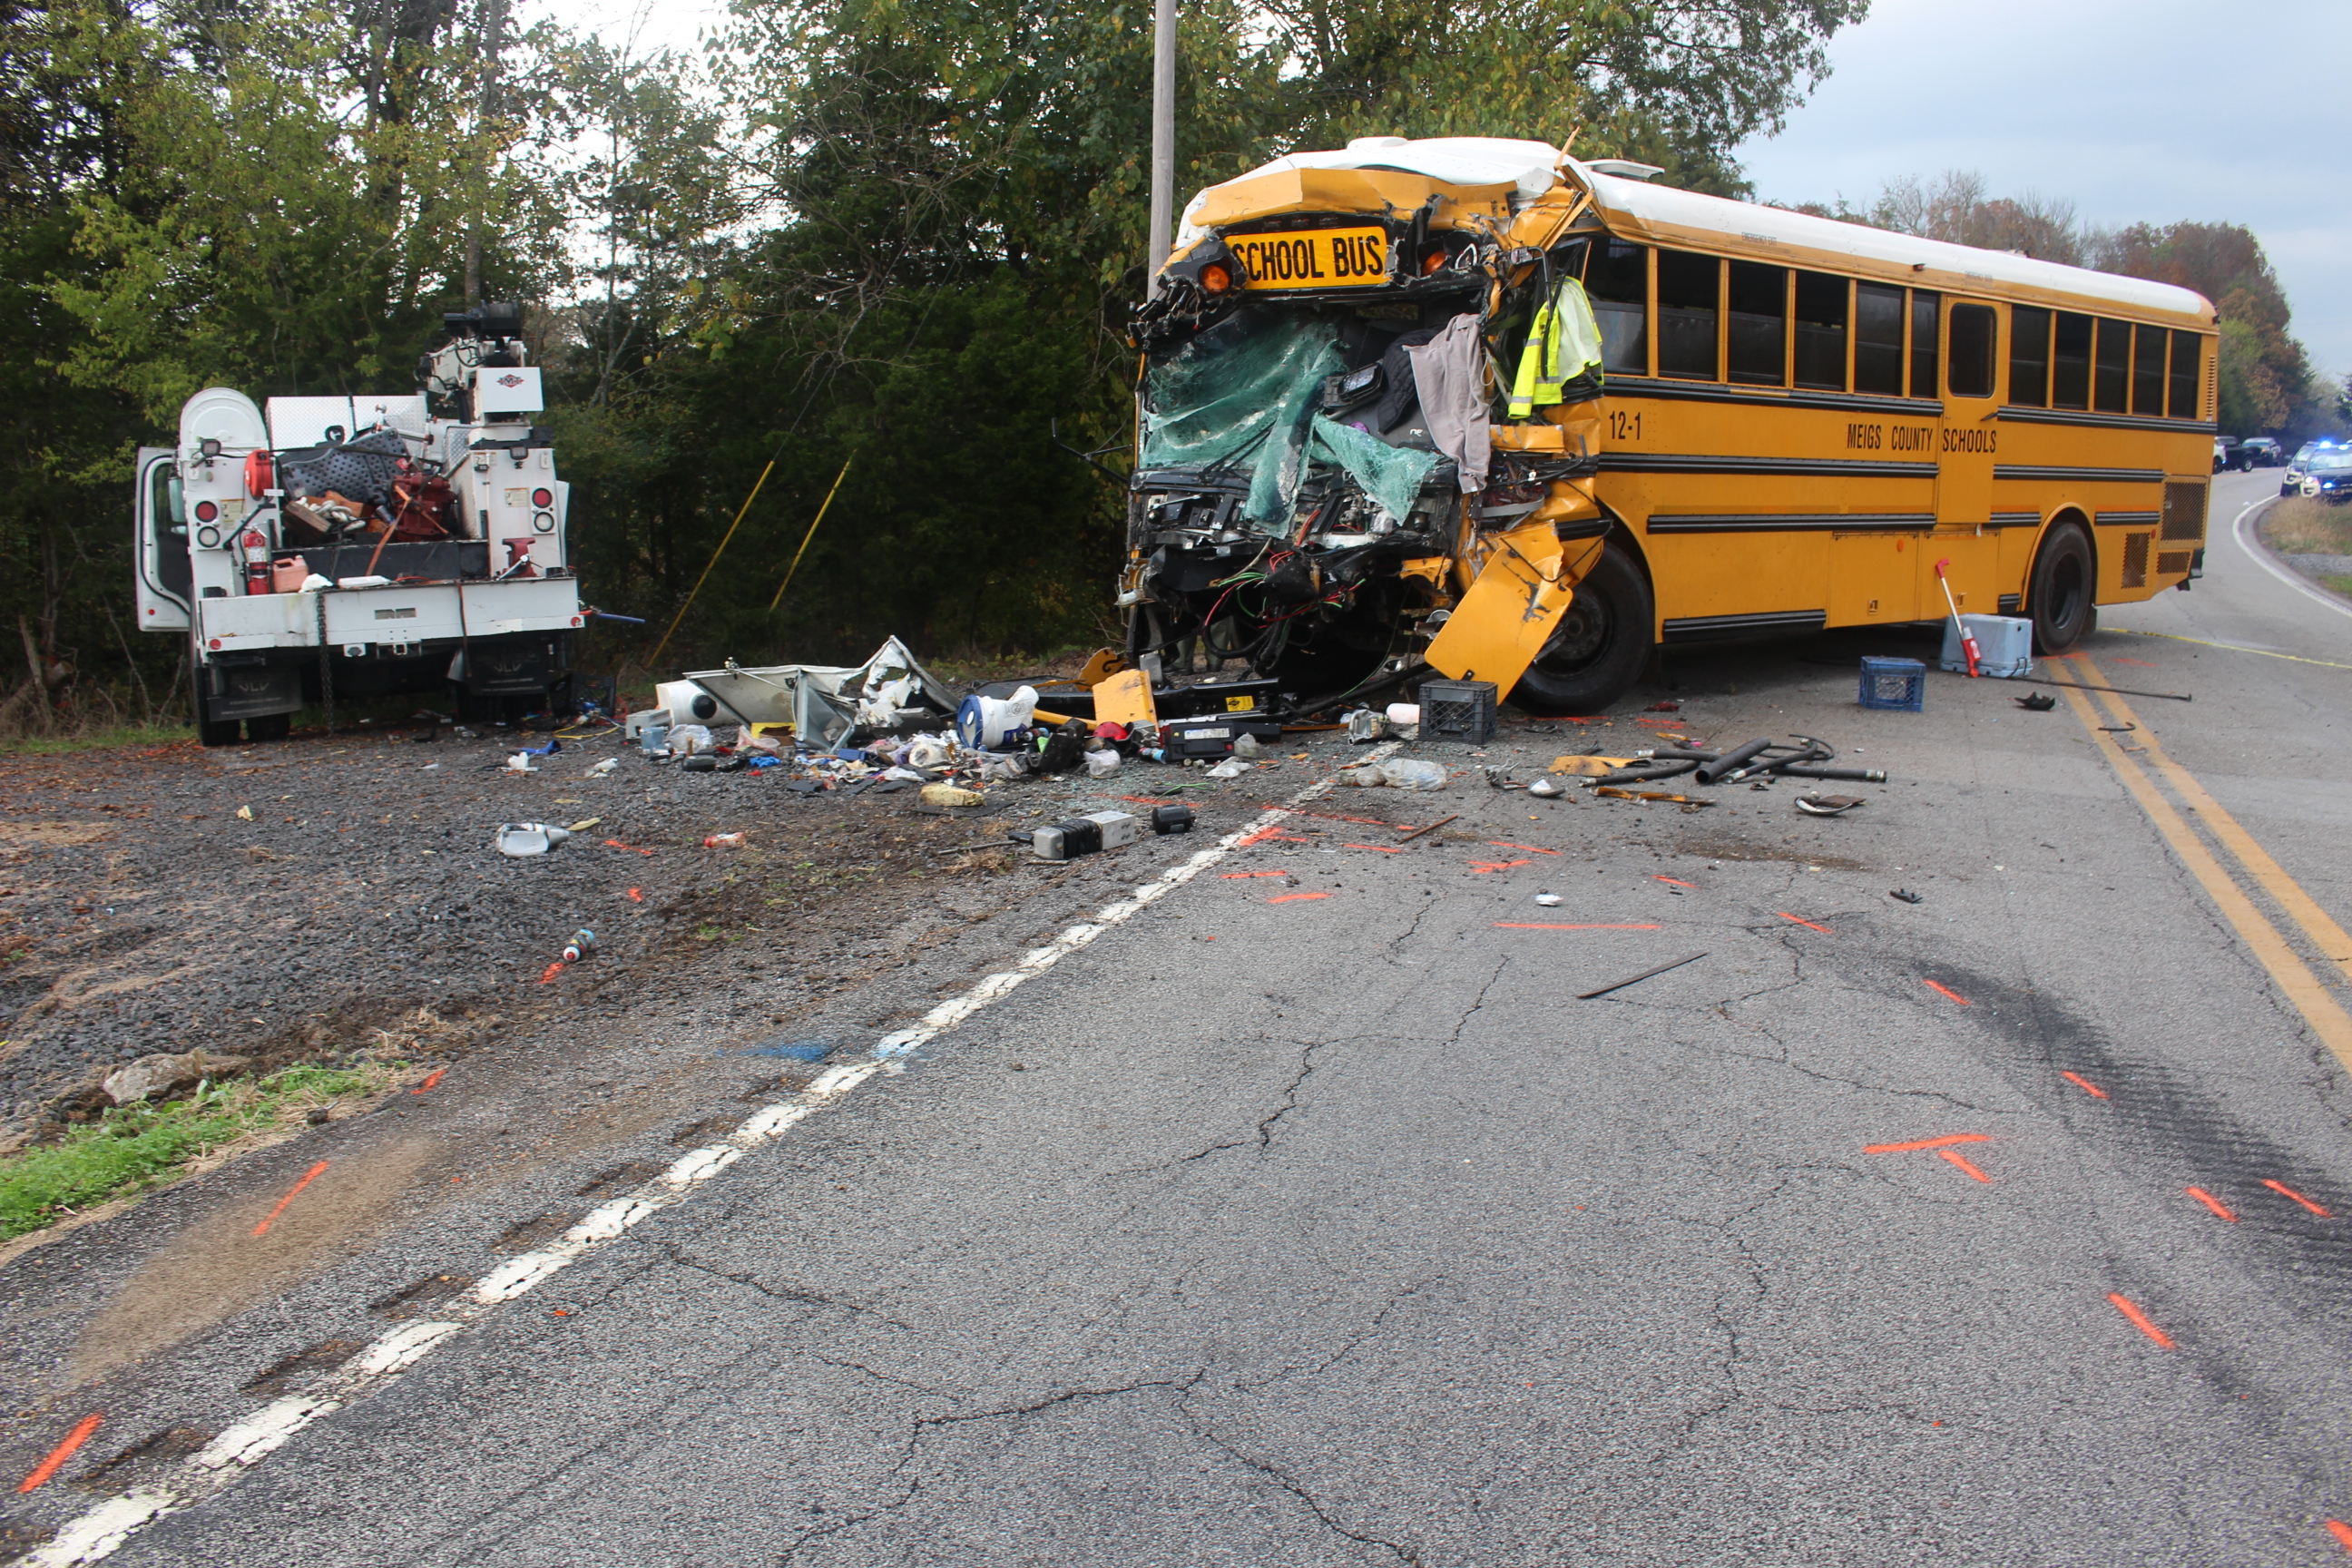 Final rest positions of truck and school bus involved in the fatal crash in Decatur, Tennessee on Oct. 27, 2020. (Source: Tennes